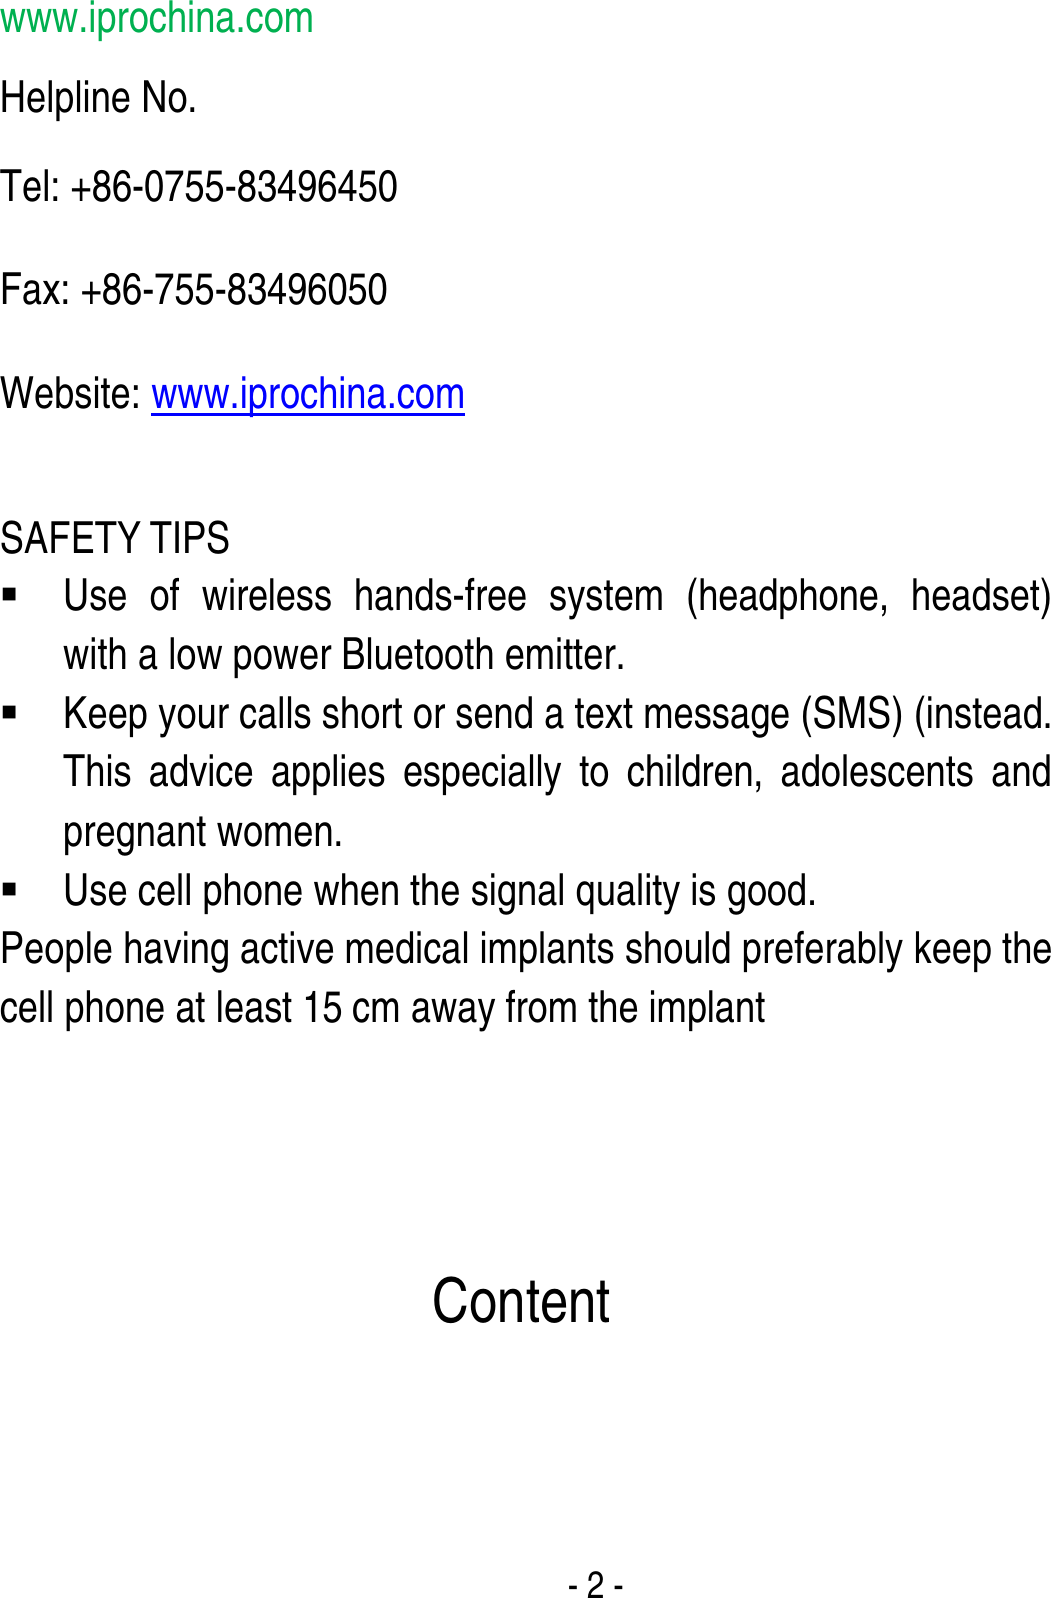  - 2 - www.iprochina.com Helpline No.   Tel: +86-0755-83496450 Fax: +86-755-83496050 Website: www.iprochina.com  SAFETY TIPS  Use of wireless hands-free system (headphone, headset) with a low power Bluetooth emitter.  Keep your calls short or send a text message (SMS) (instead. This advice applies especially to children, adolescents and pregnant women.  Use cell phone when the signal quality is good. People having active medical implants should preferably keep the cell phone at least 15 cm away from the implant     Content 